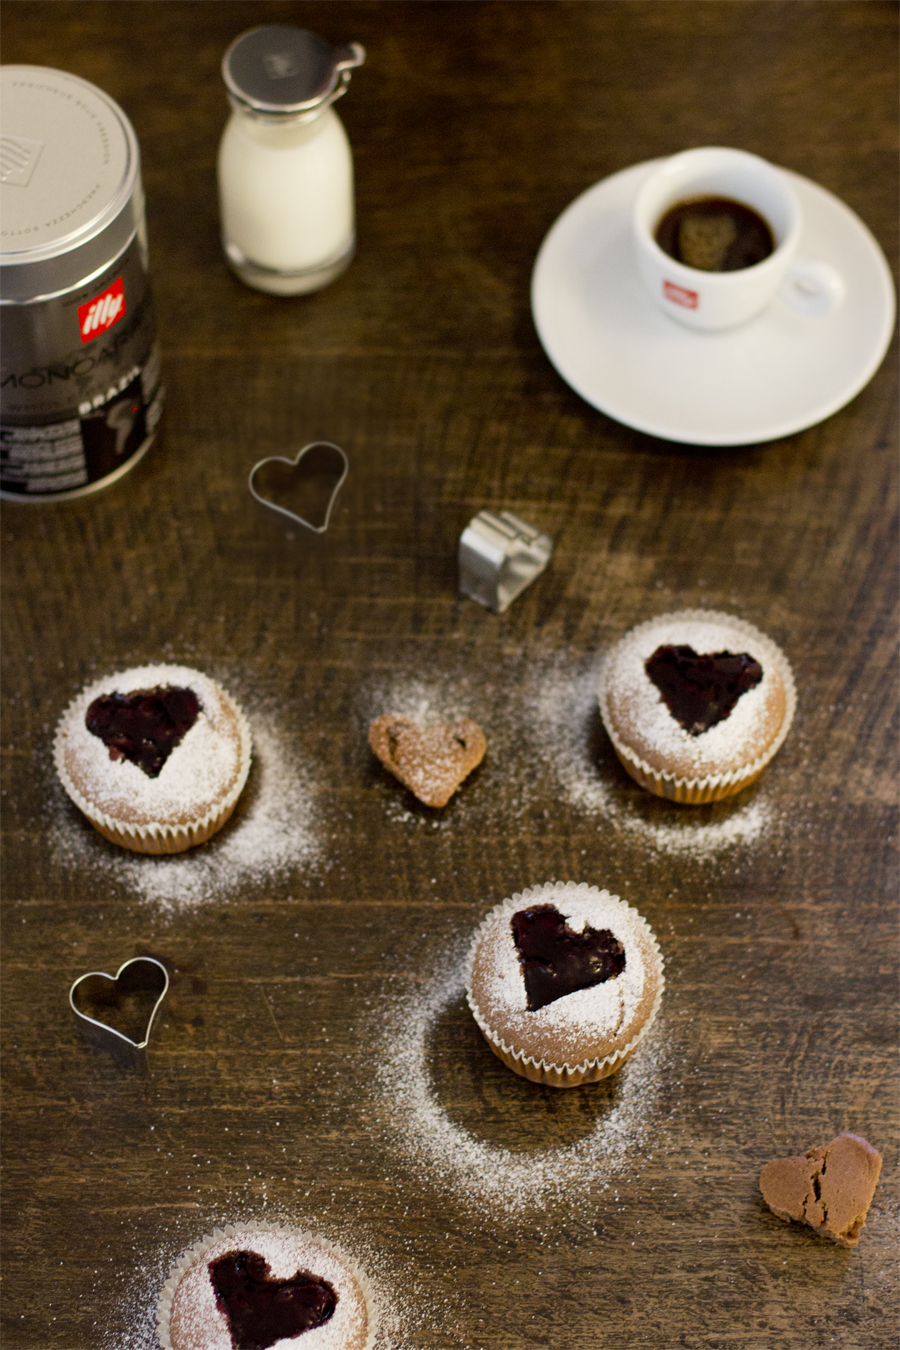 Coffee muffins with cherry filling for Valentine's Day | LOOK WHAT I MADE ...